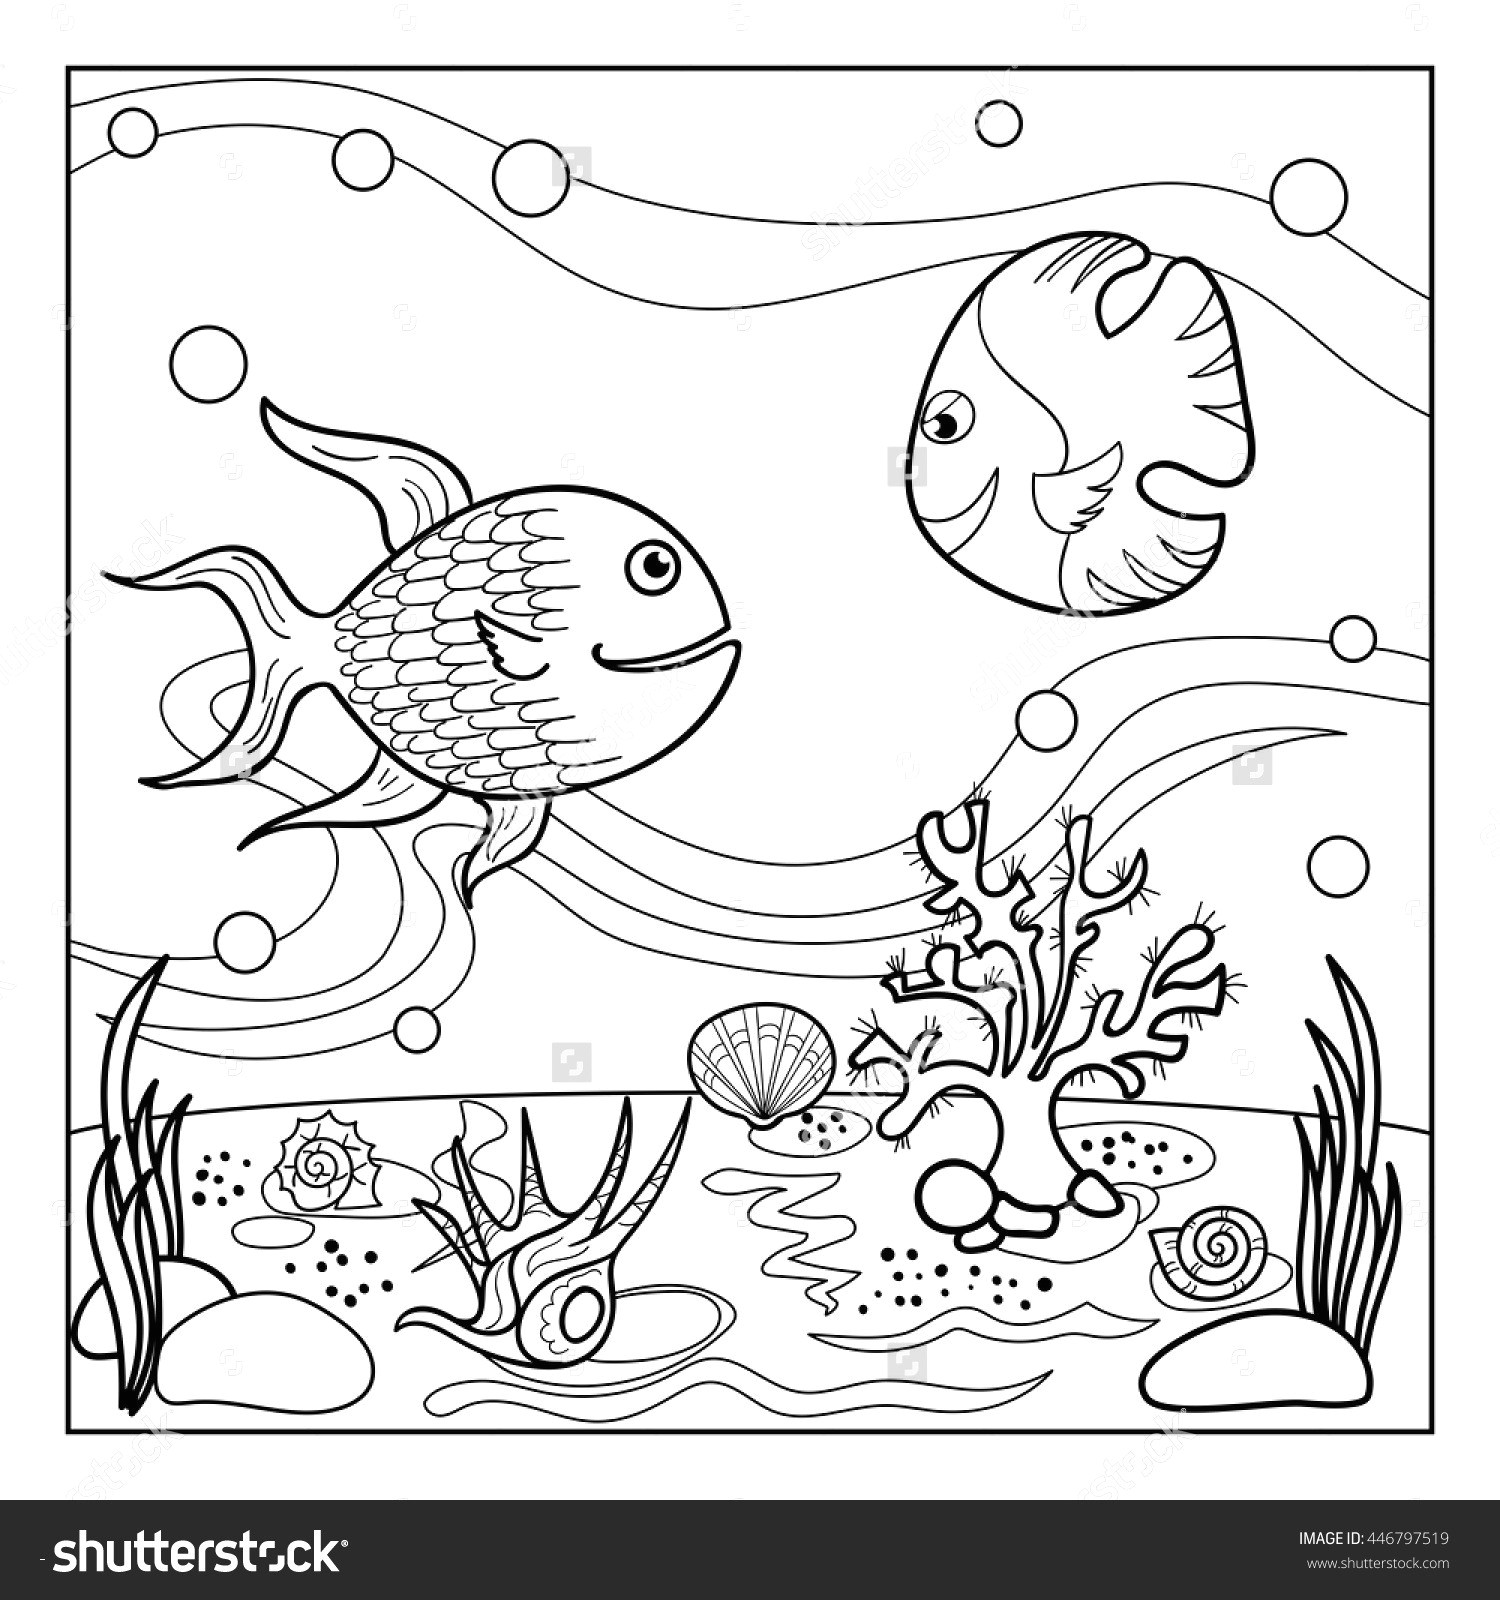 Easy Drawings In Color Easy to Draw Feather Feather Coloring Page Fresh Home Coloring Pages